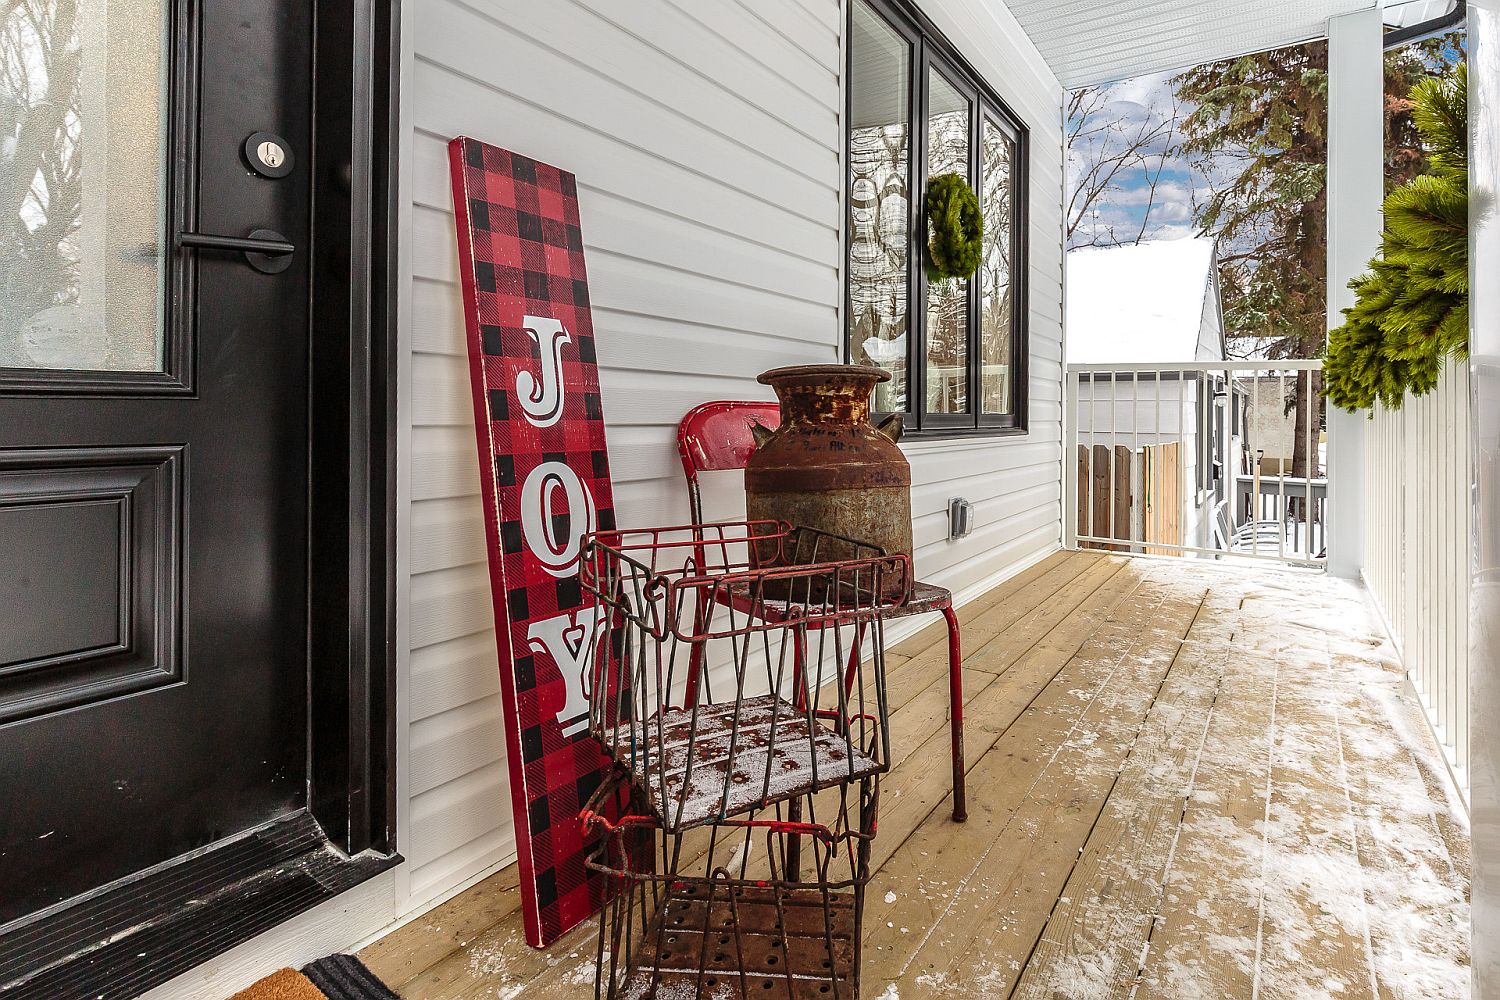 You-do-not-need-much-to-create-a-lovely-Chrsitmas-themed-front-porch-like-this-42892